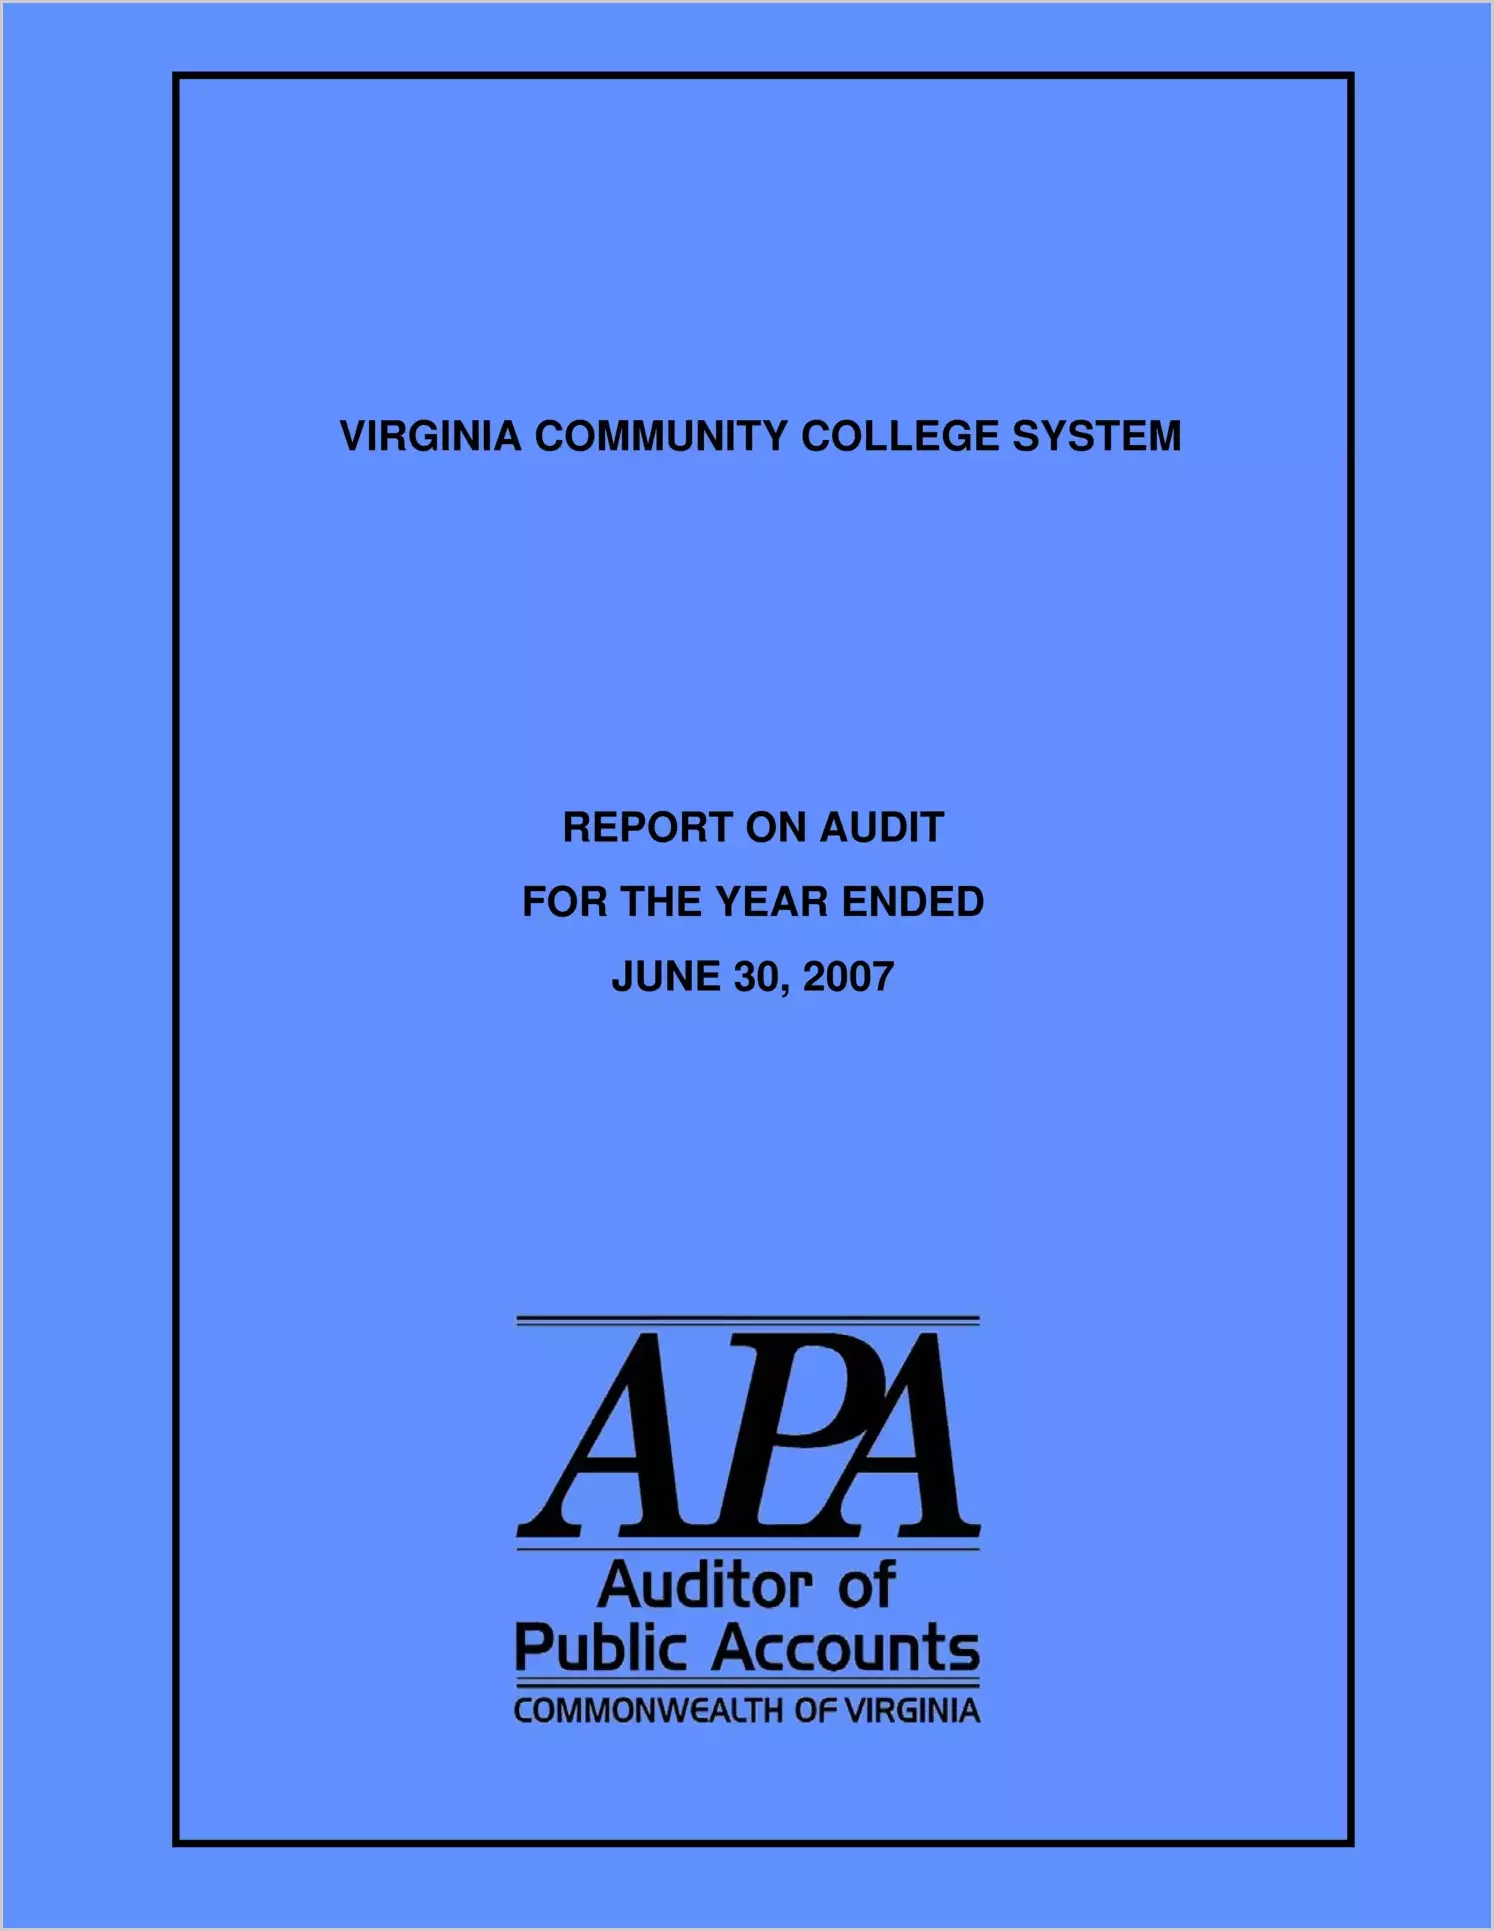 Virginia Community College System for the year ended June 30, 2007